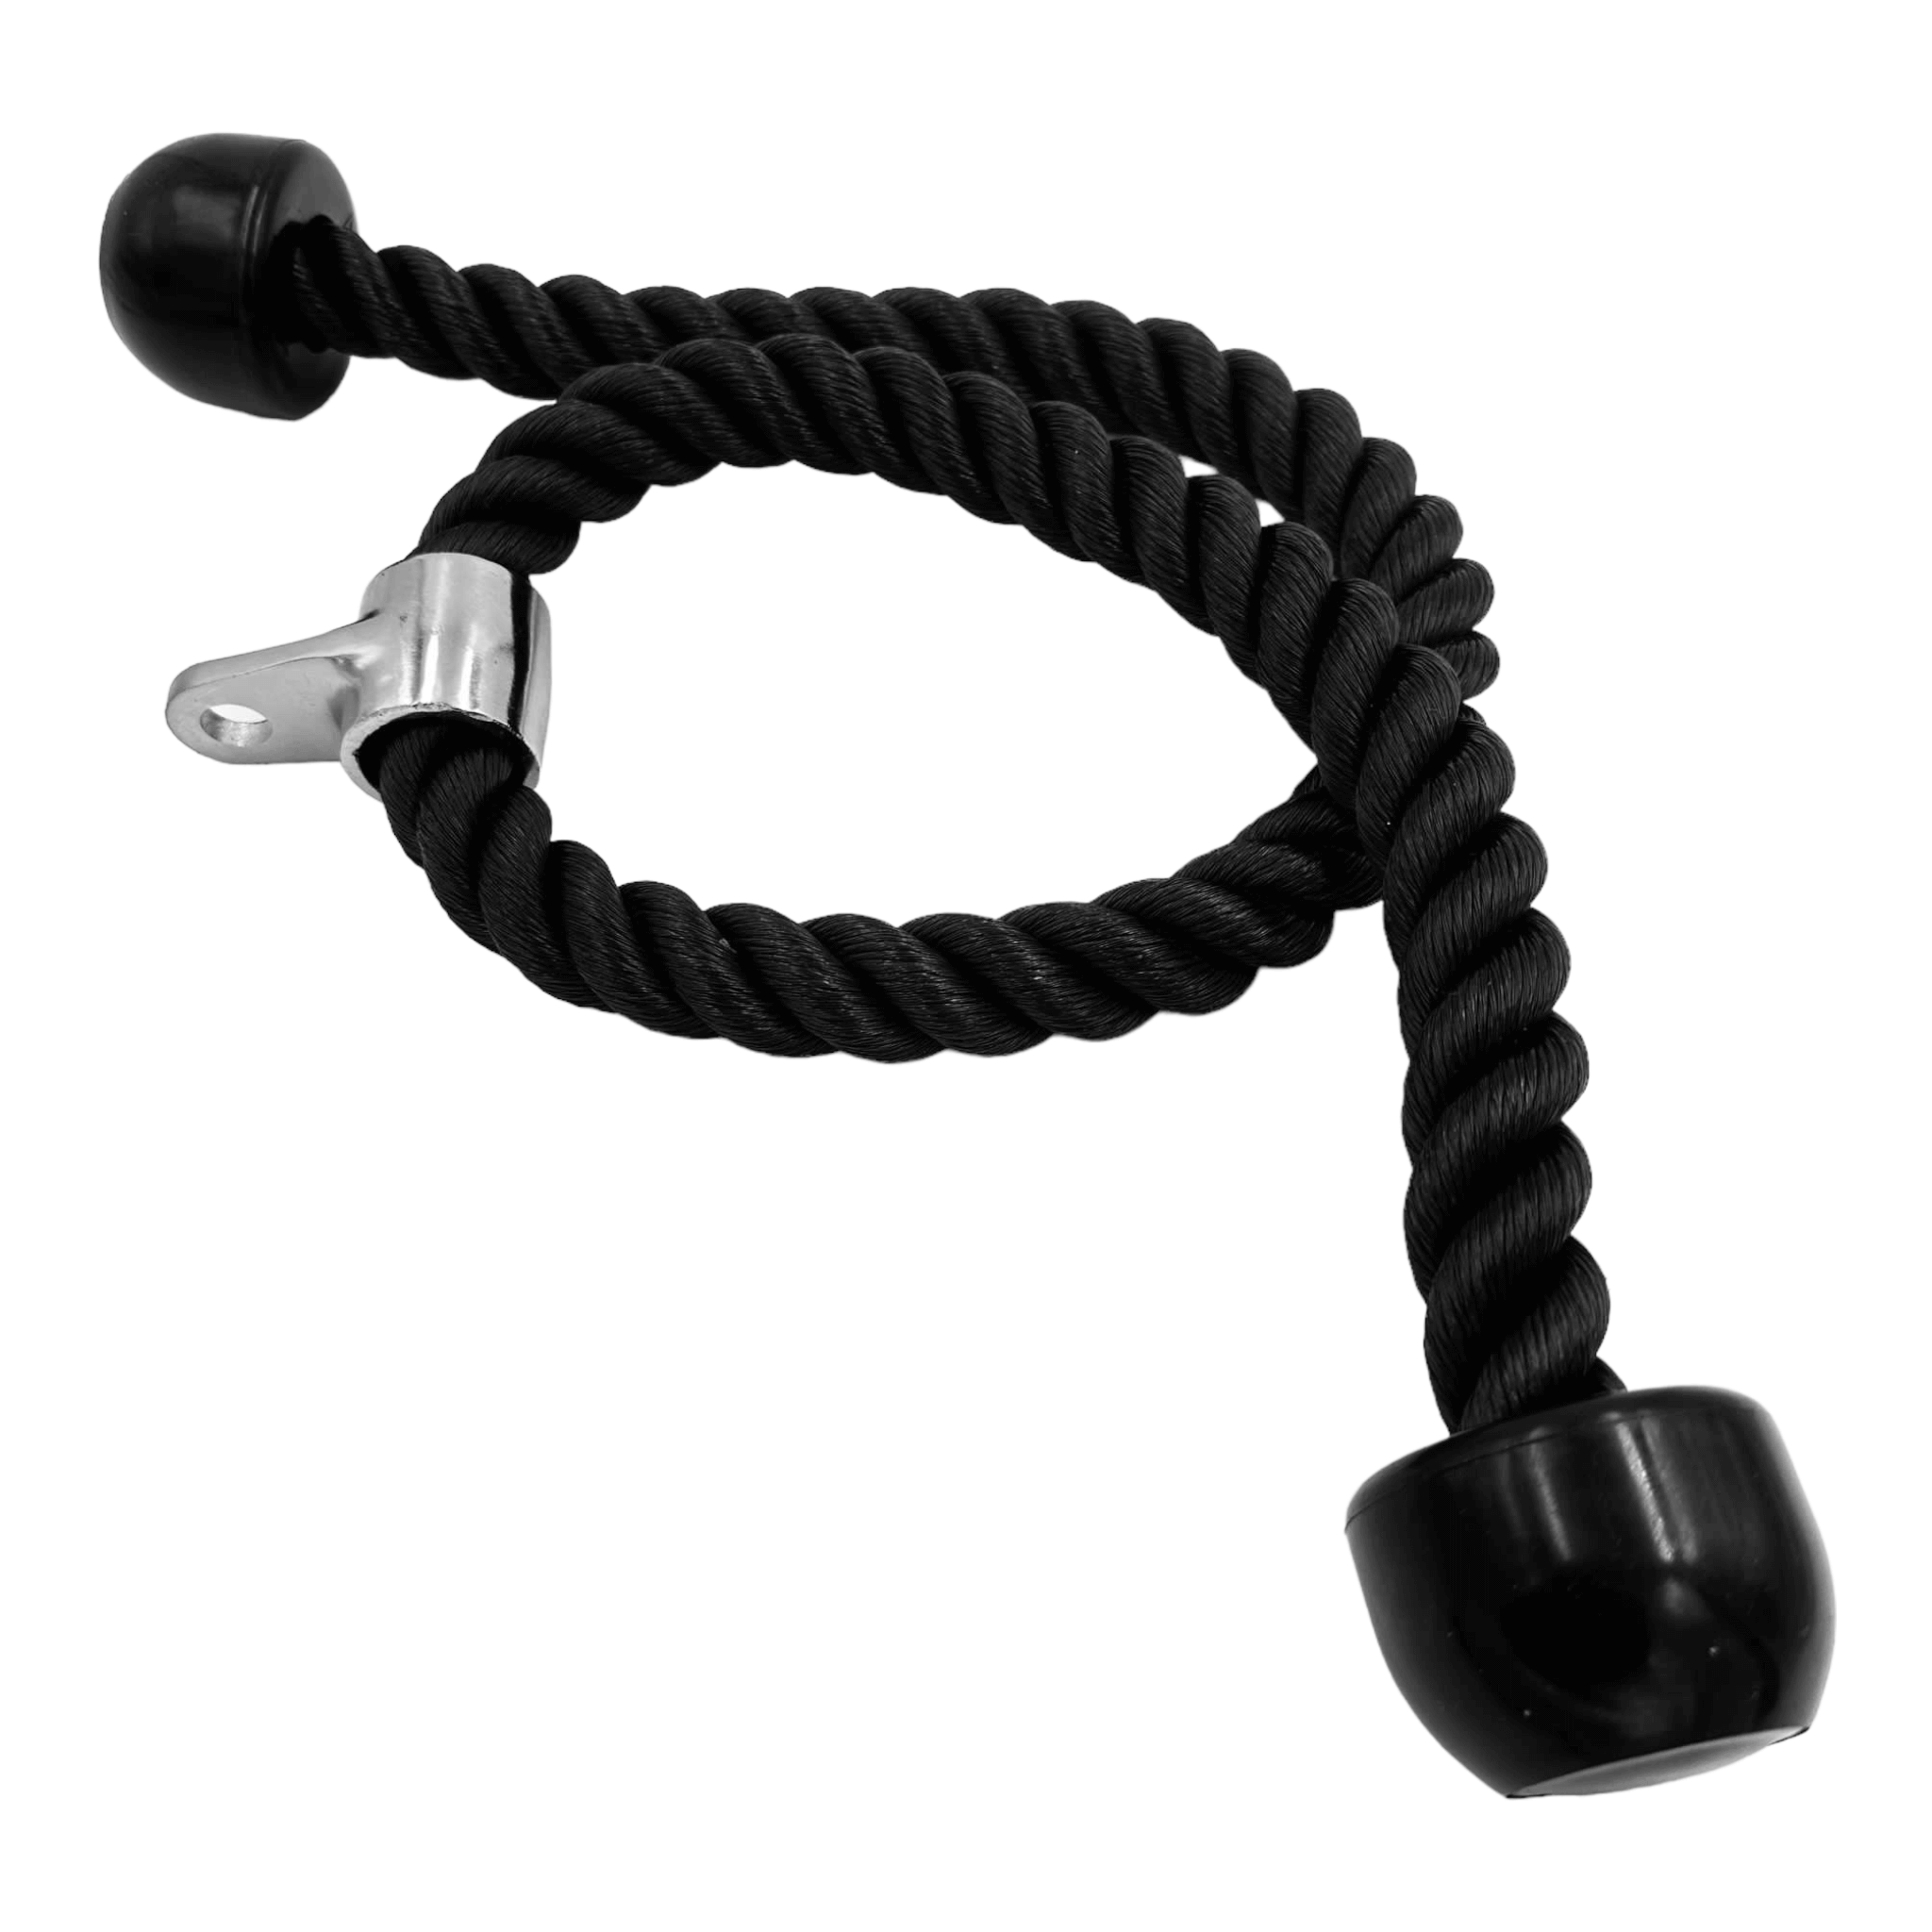 120 cm Long Nylon Tricep Rope Gym Cable Attachment | INSOURCE